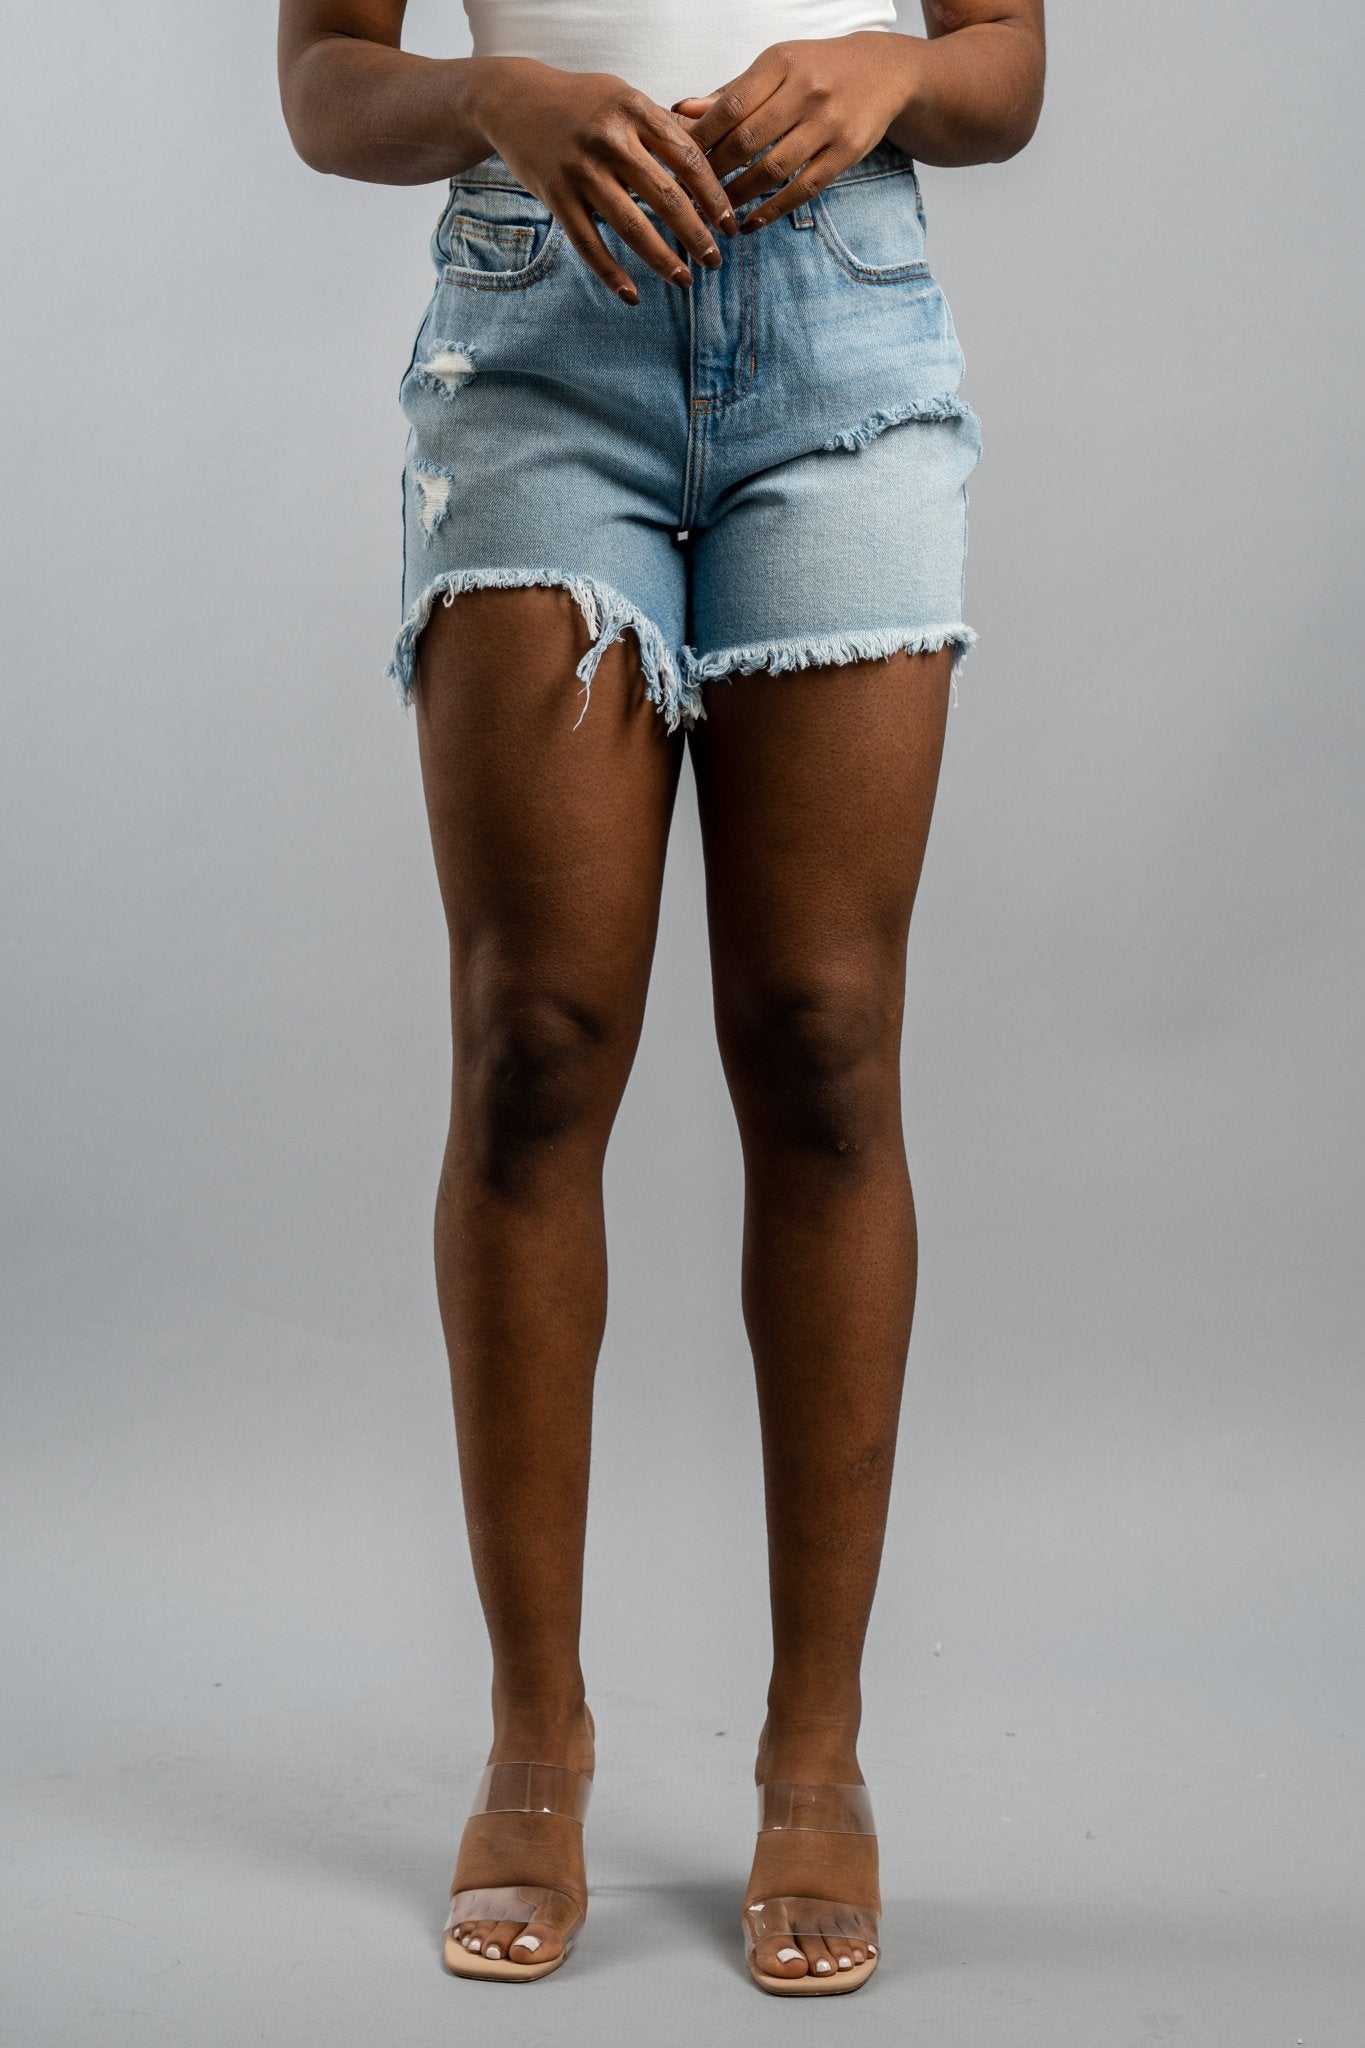 Cello high rise fray hem shorts light wash - Stylish Shorts - Trendy Staycation Outfits at Lush Fashion Lounge Boutique in Oklahoma City